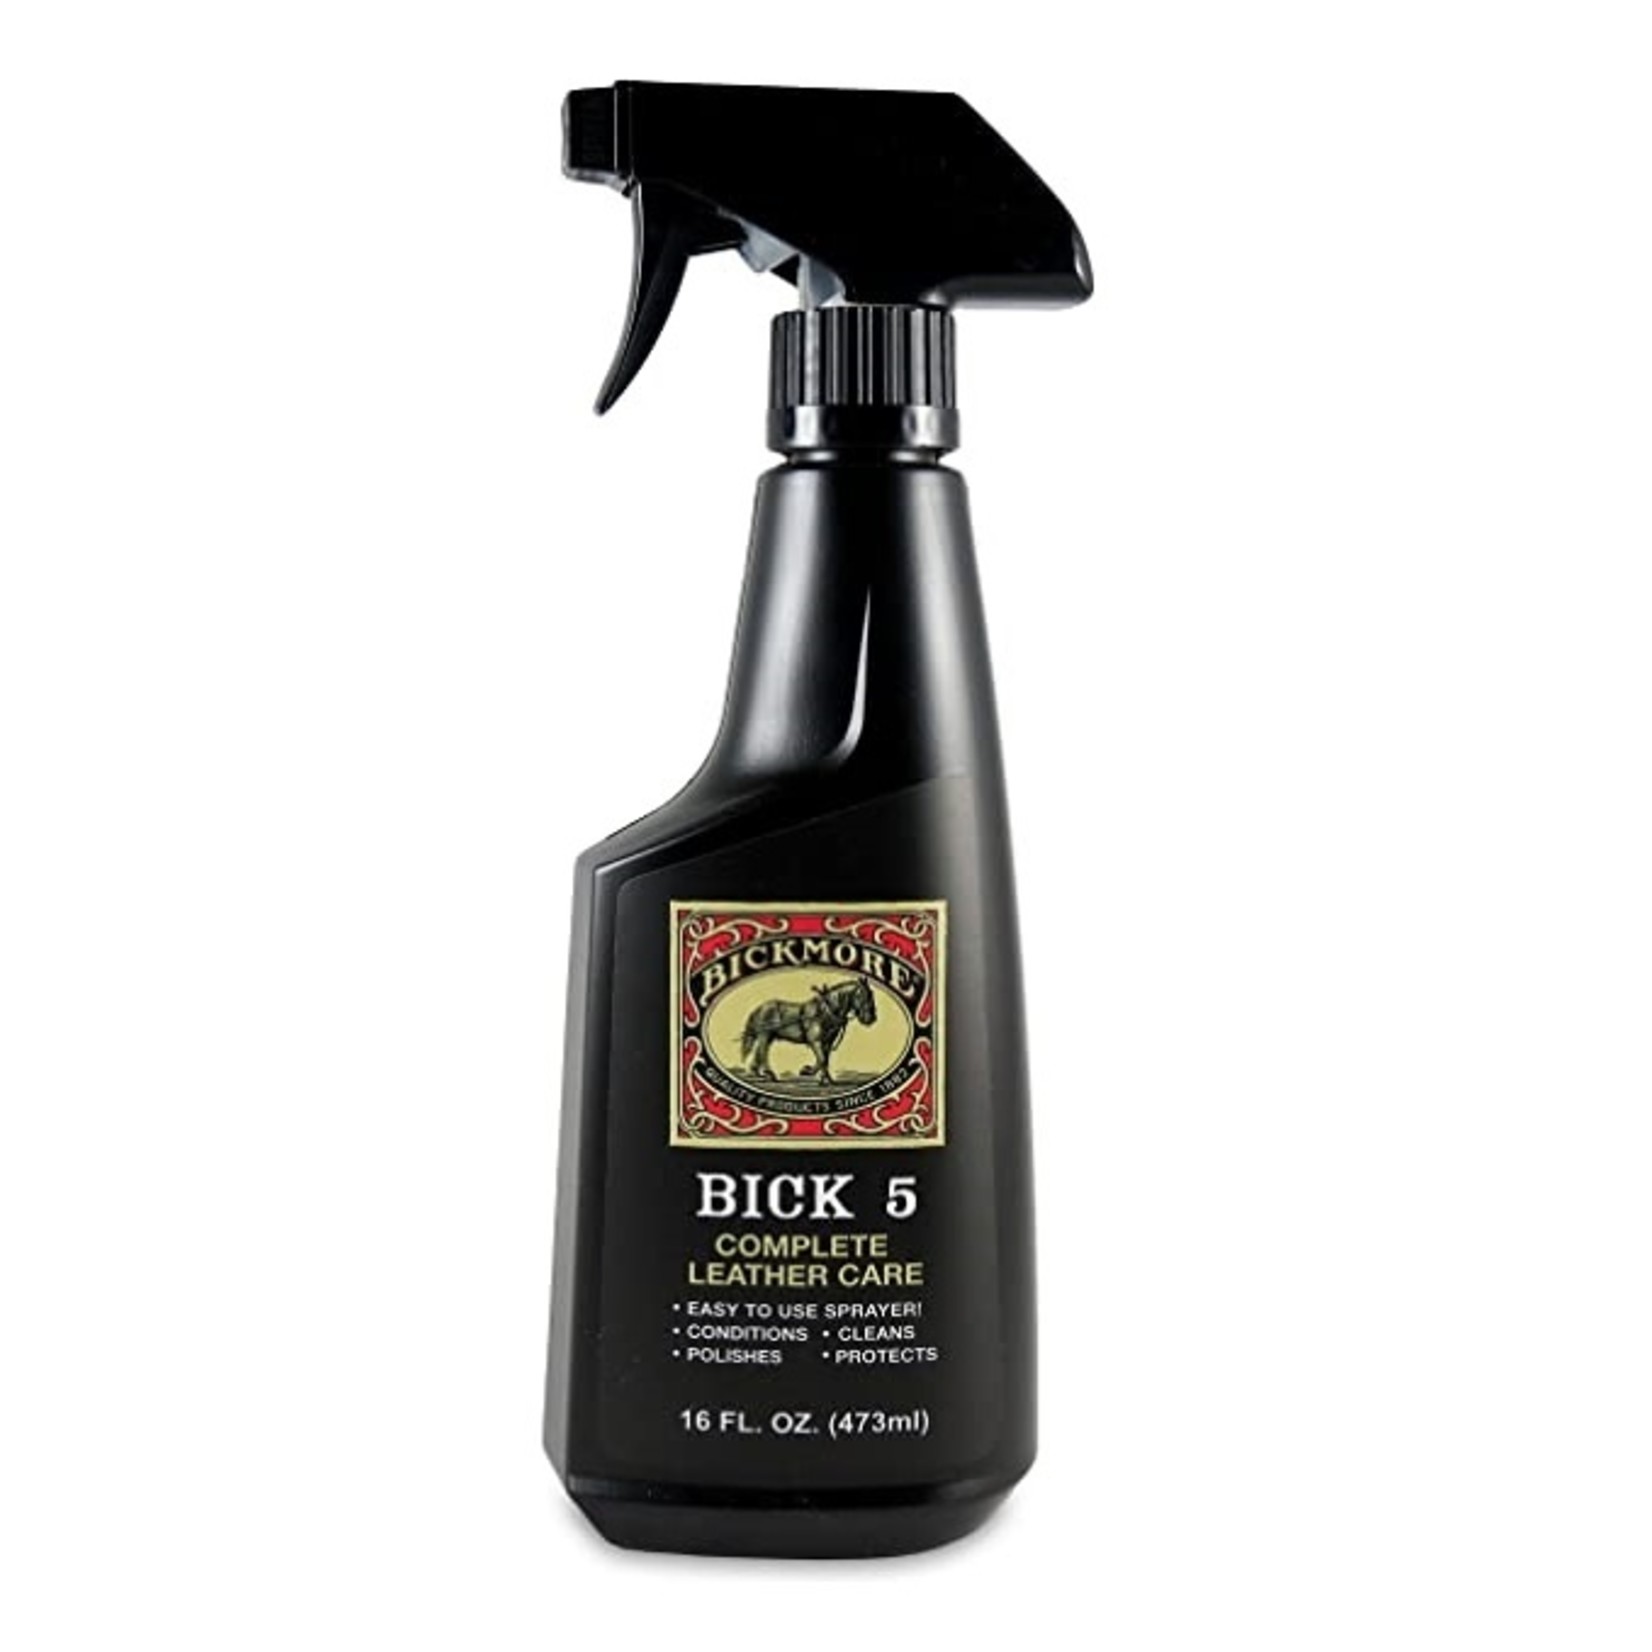 Bickmore Bick 5 Leather Cleaner & Conditioner 16oz Spray